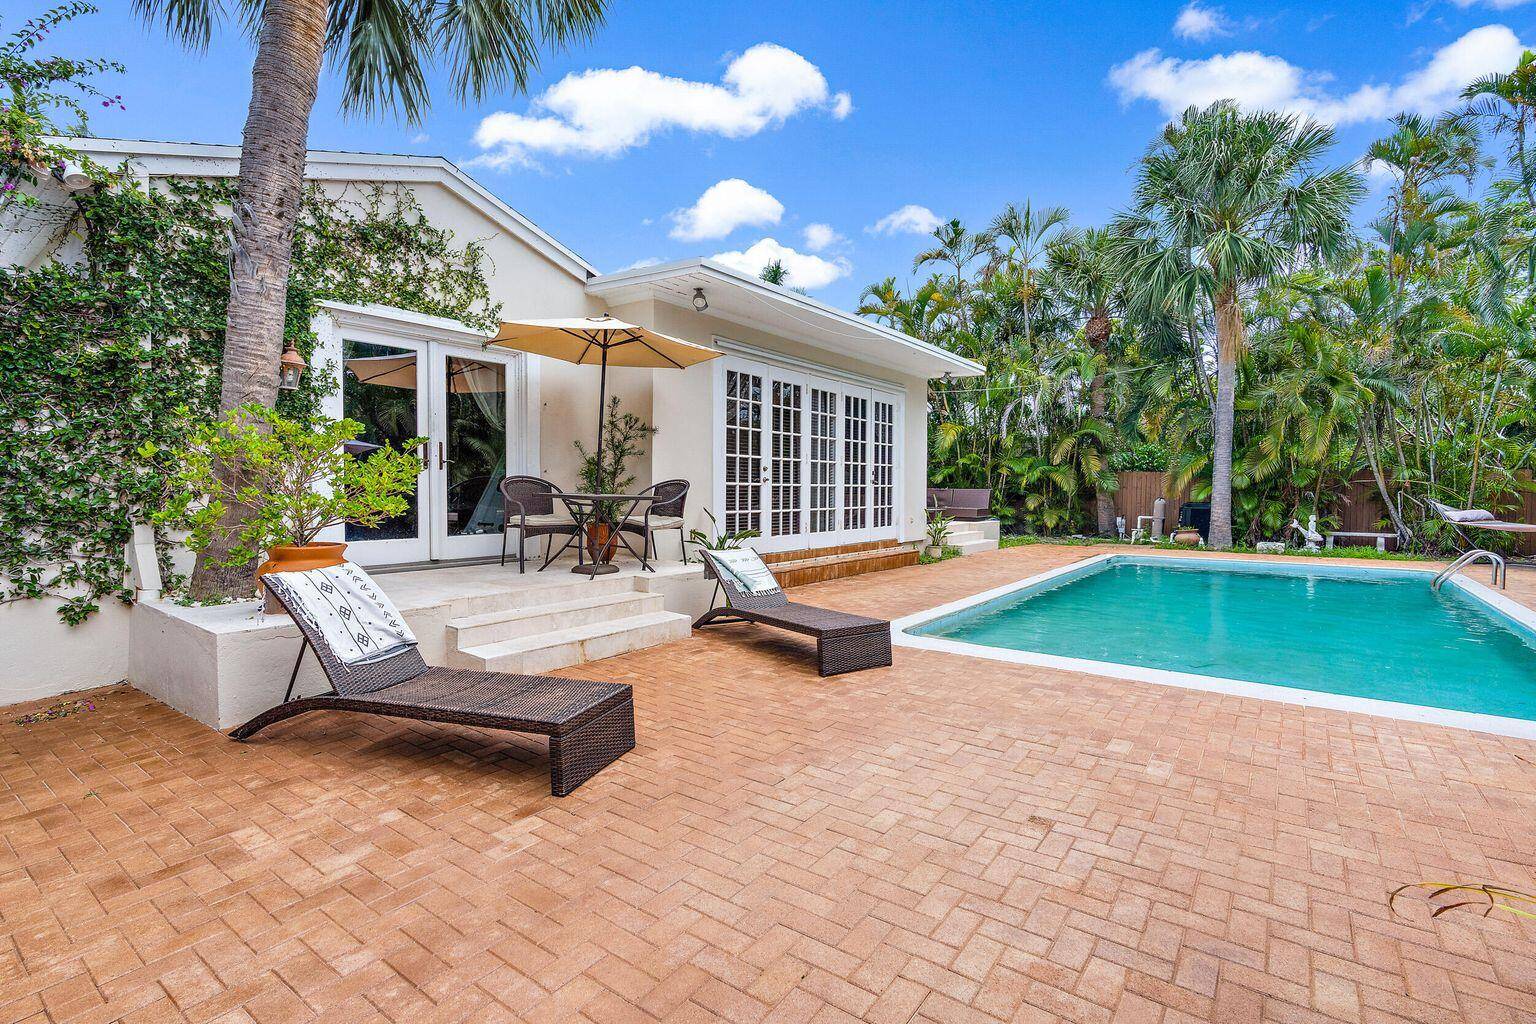 This charming home is situated behind high privacy hedges on one of the most desirable blocks of historic Northwood Shores just a short stroll from Flagler Drive and the Intracoastal ...